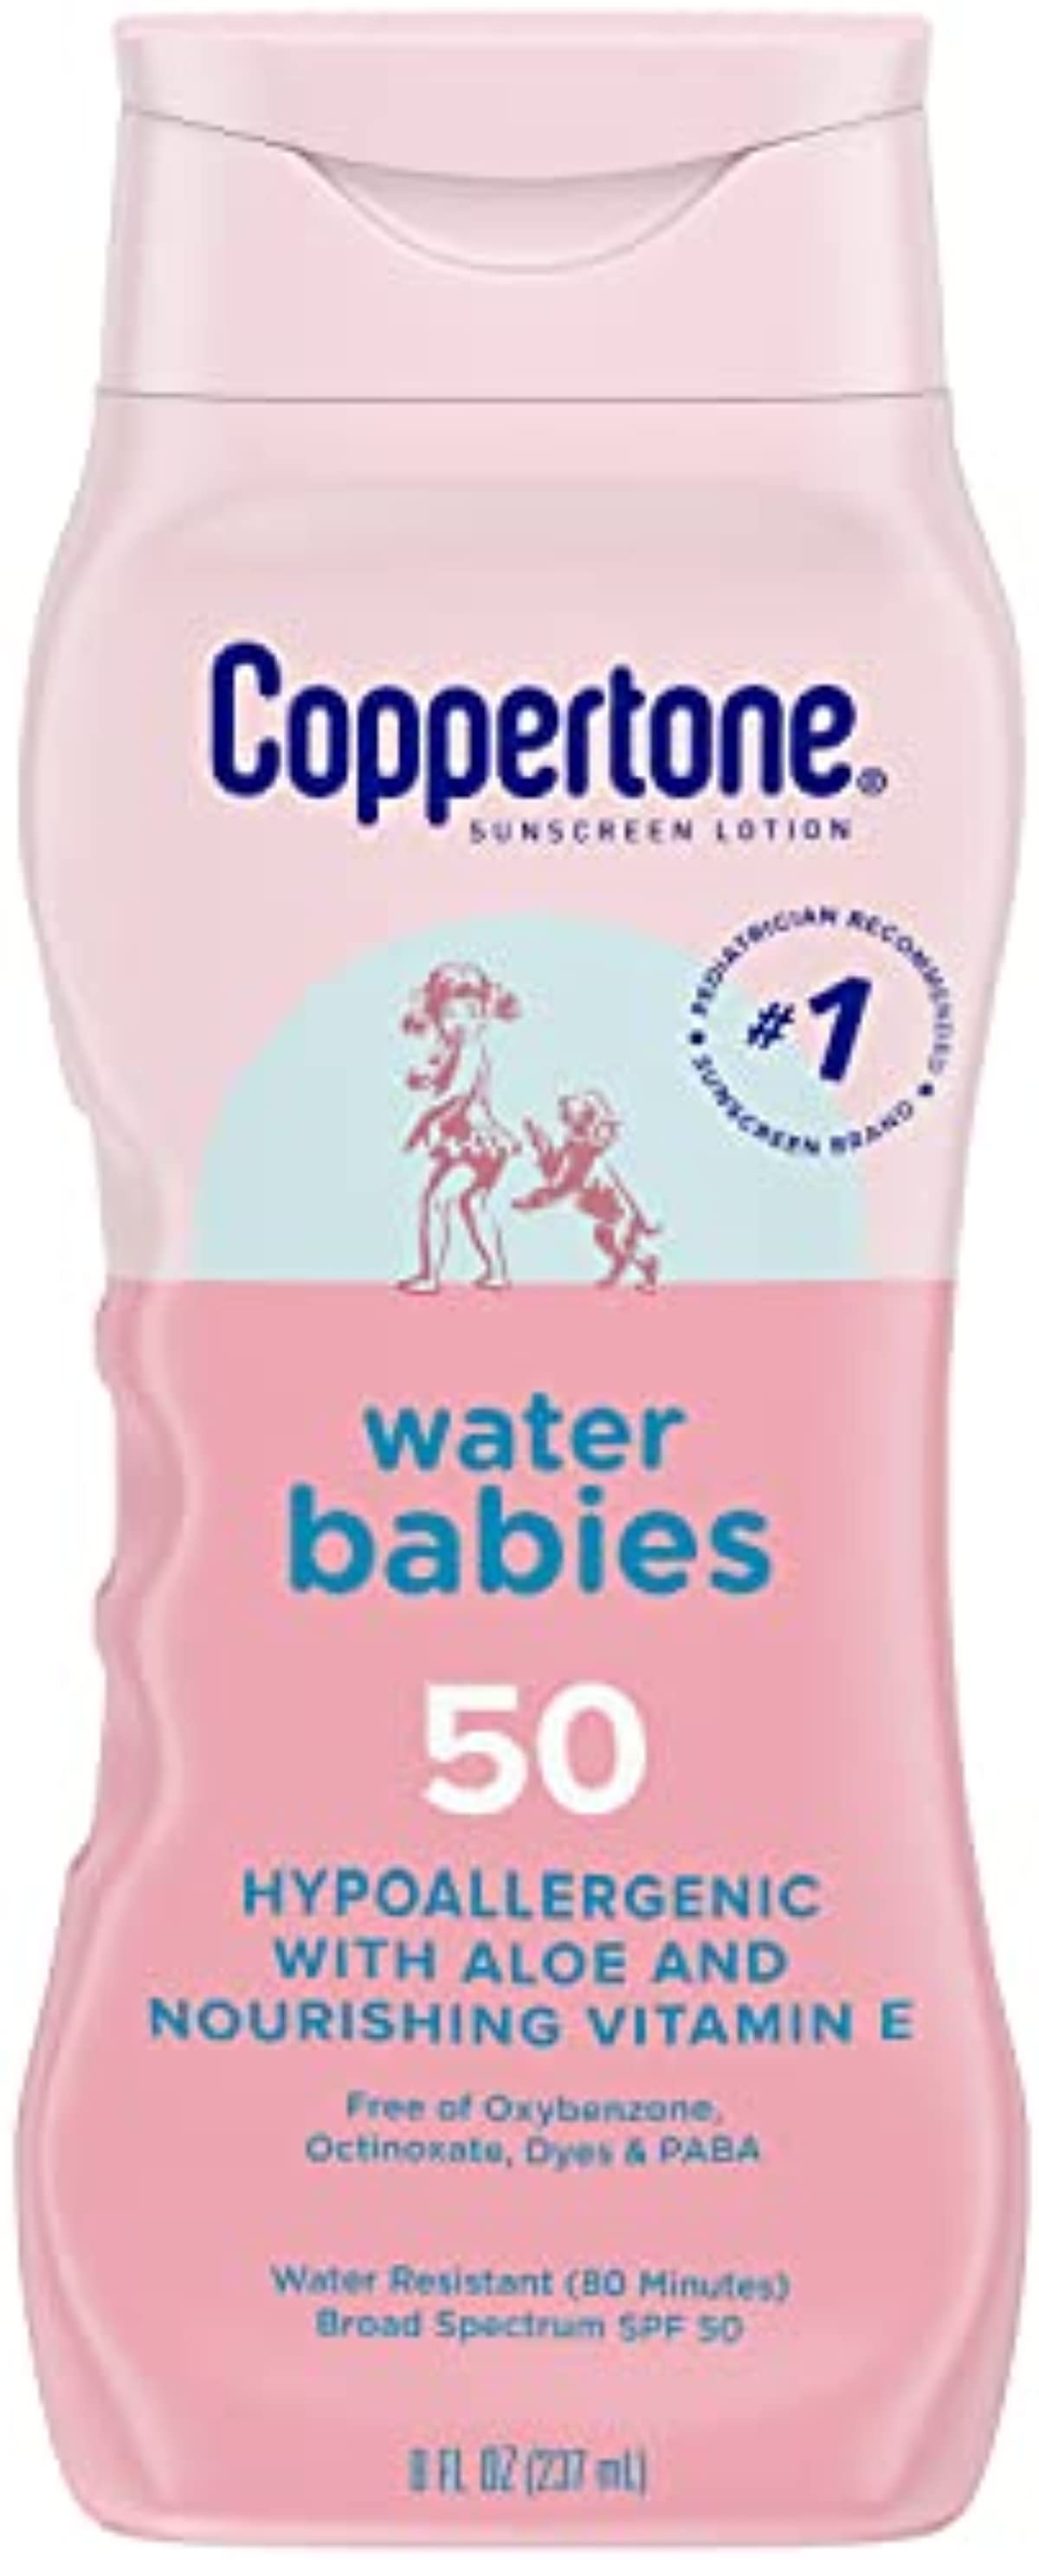 Coppertone Water Babies Sunscreen Lotion SPF 50, Pediatrician Recommended Baby Sunscreen, Water Resistant Sunscreen for Babies, 8 Fl Oz Bottle